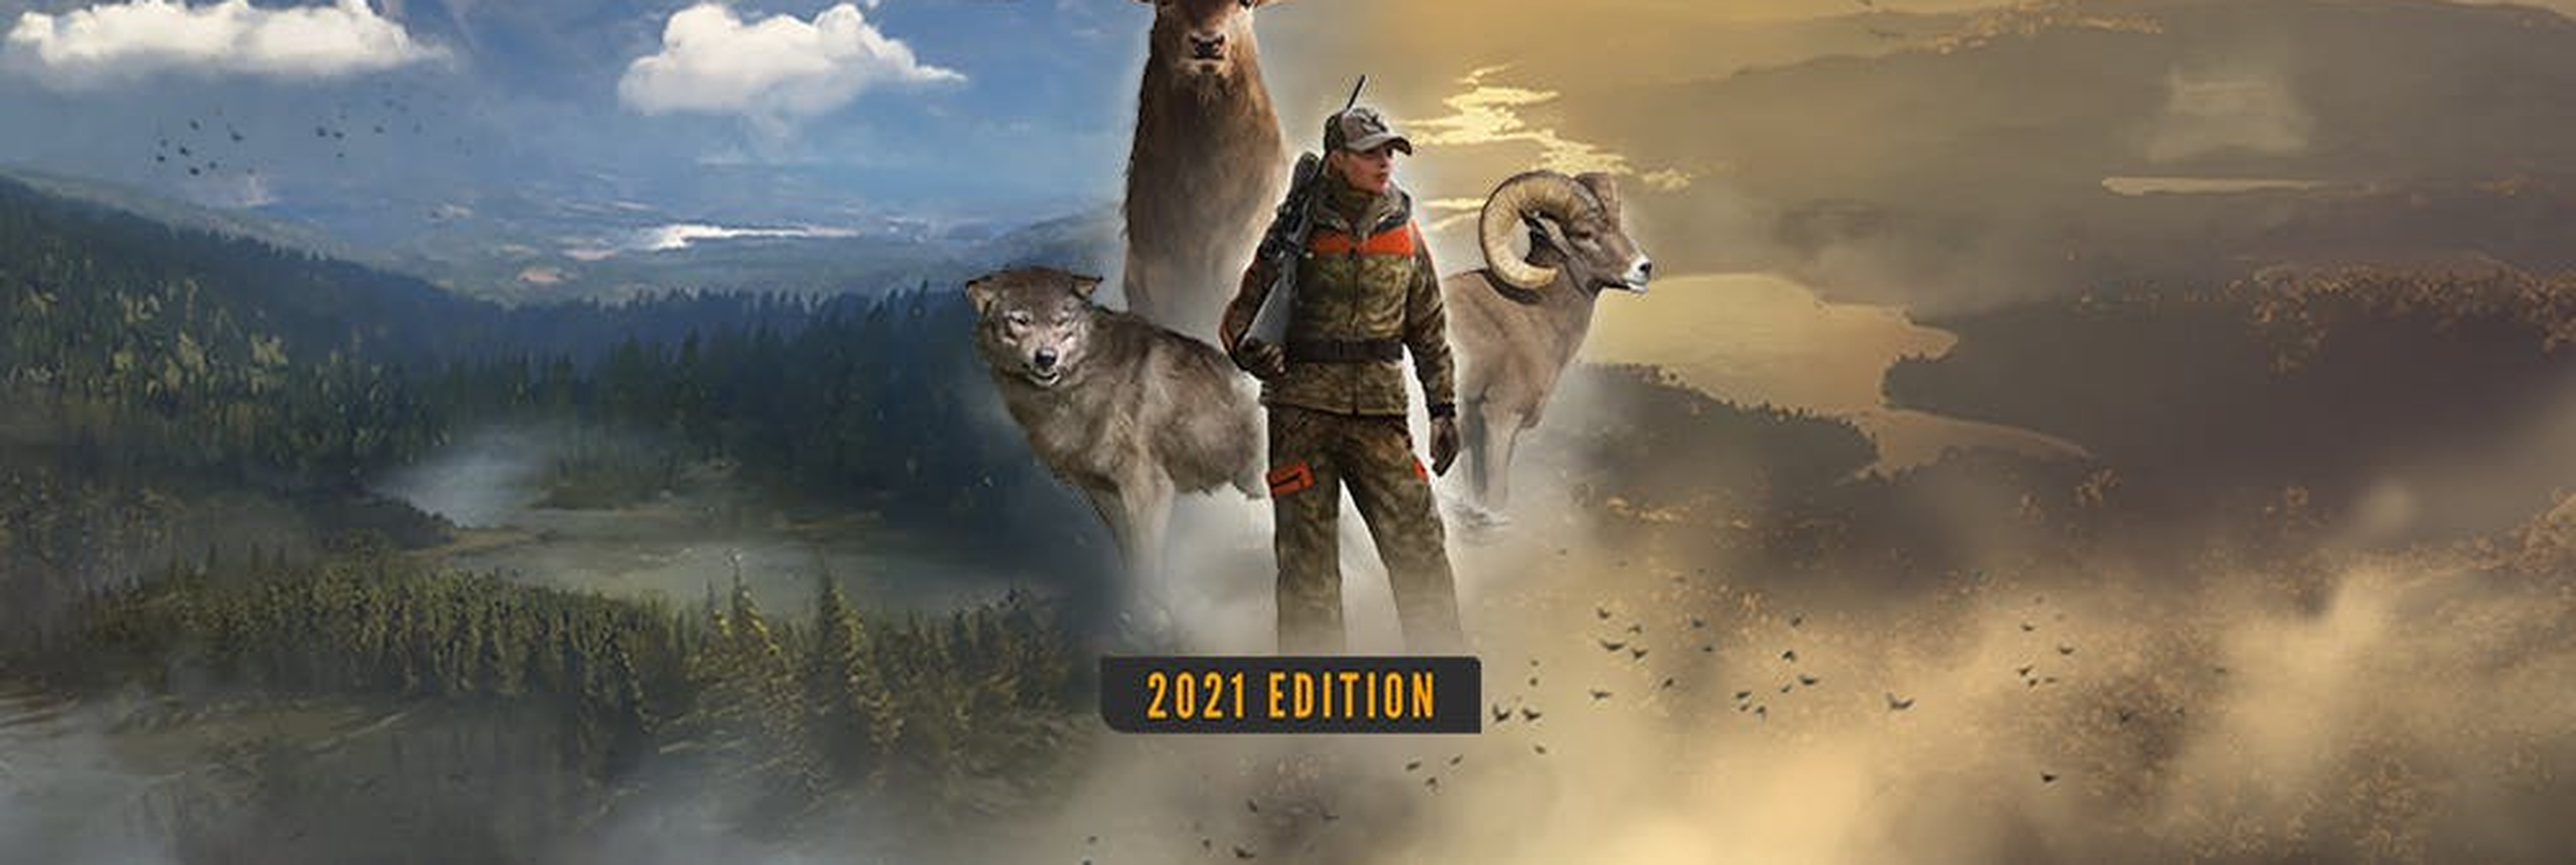 Thehunter Call Of The Wild 21 Edition Is Now Live Avalanche Studios Group